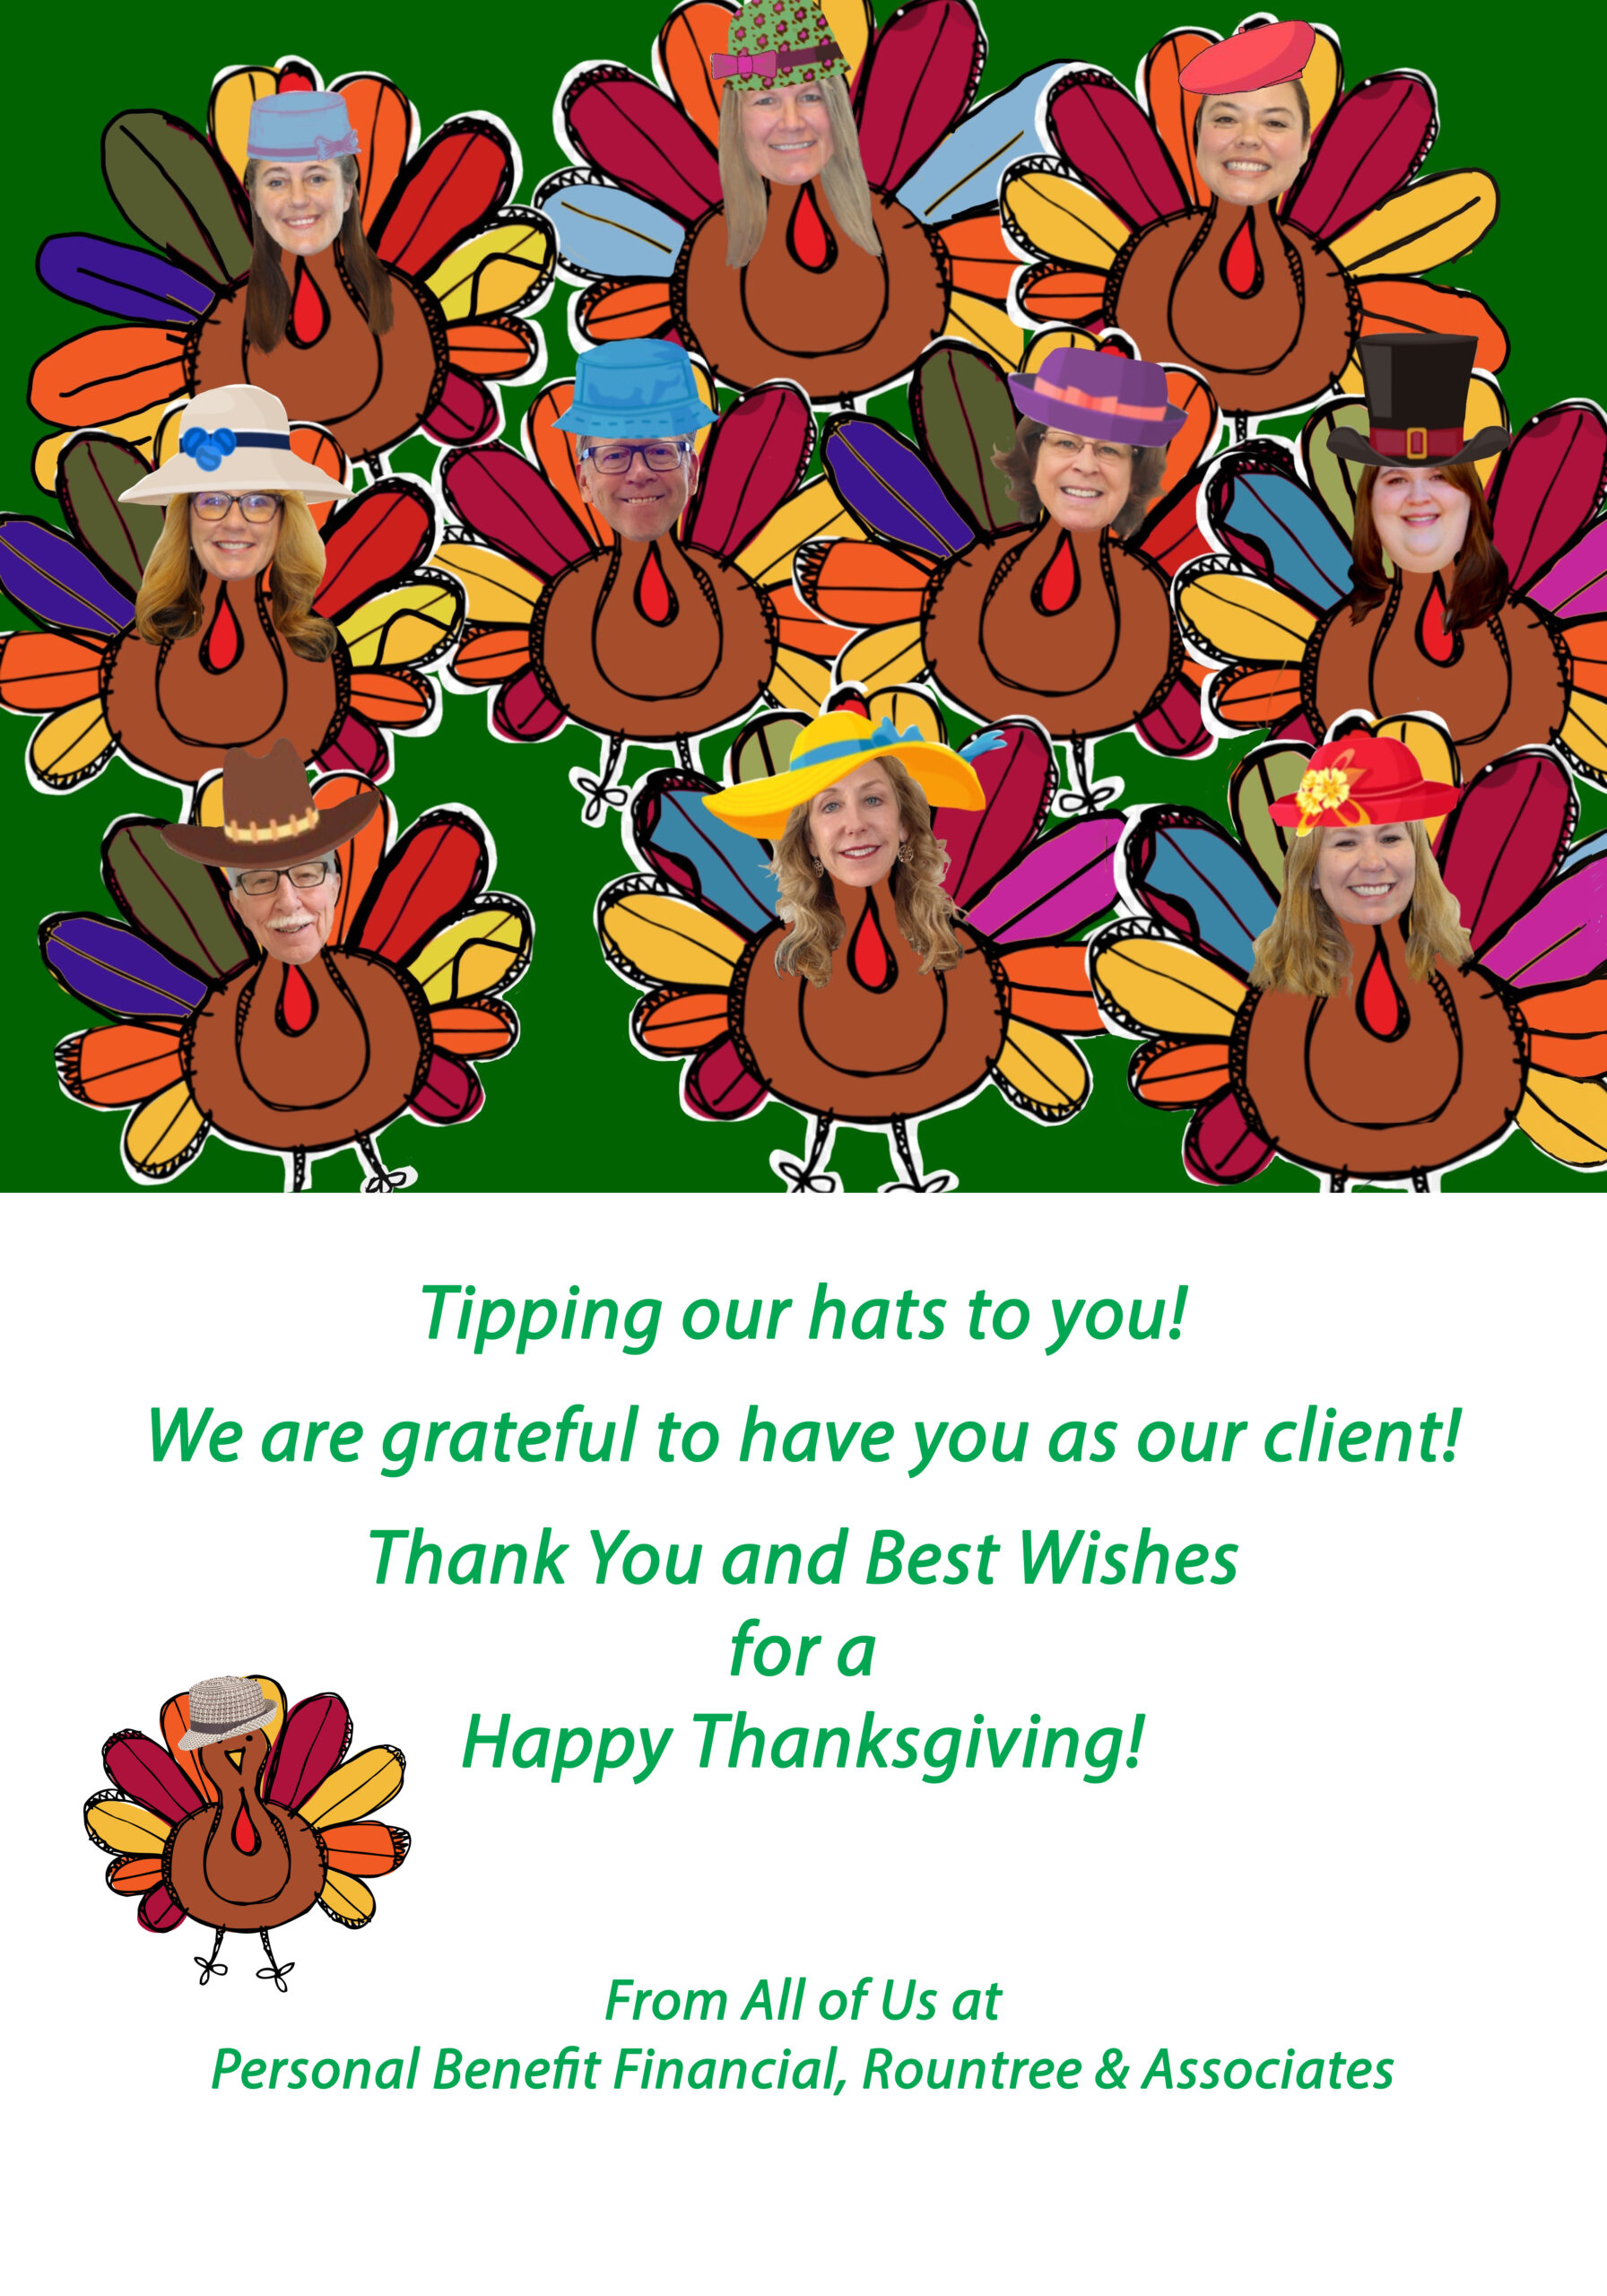 The photo shows the faces of staff from Personal Benefit Financial on the bodies of turkeys, all wearing colorful hats.</p>
<p>The green text reads: Tipping our hats to you! We are grateful to have you as our client! Thank you and Best Wishes for a Happy Thanksgiving!